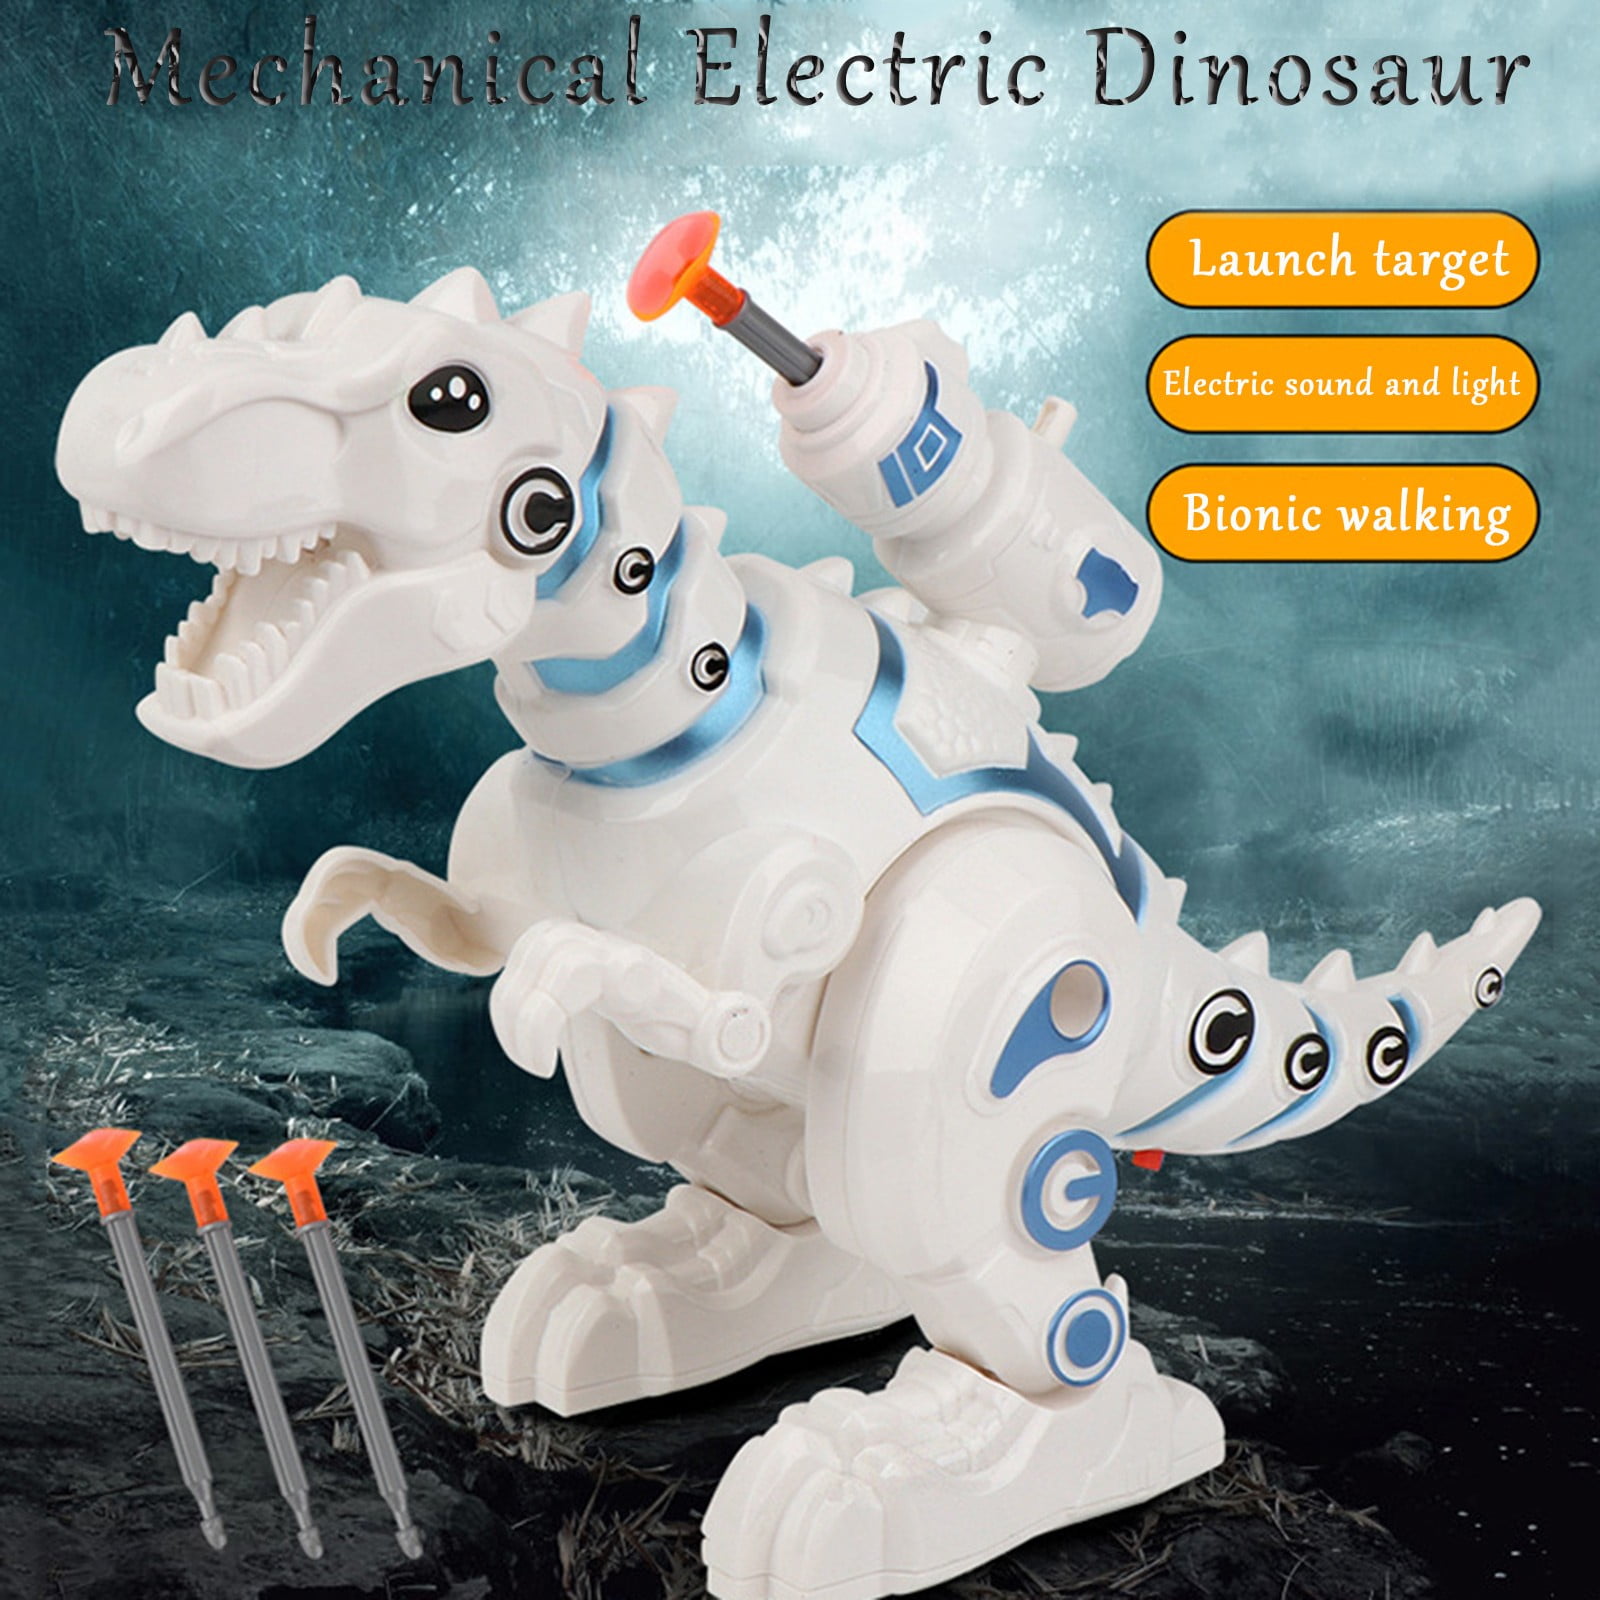 JIEQI Remote Control Dinosaur Robot for Kids,Intelligent Robot Toys Sings Dances Sprays Mist Launches Missiles Walking Fight Models Electronic RC Robot Toys for Boys Girls Gift 